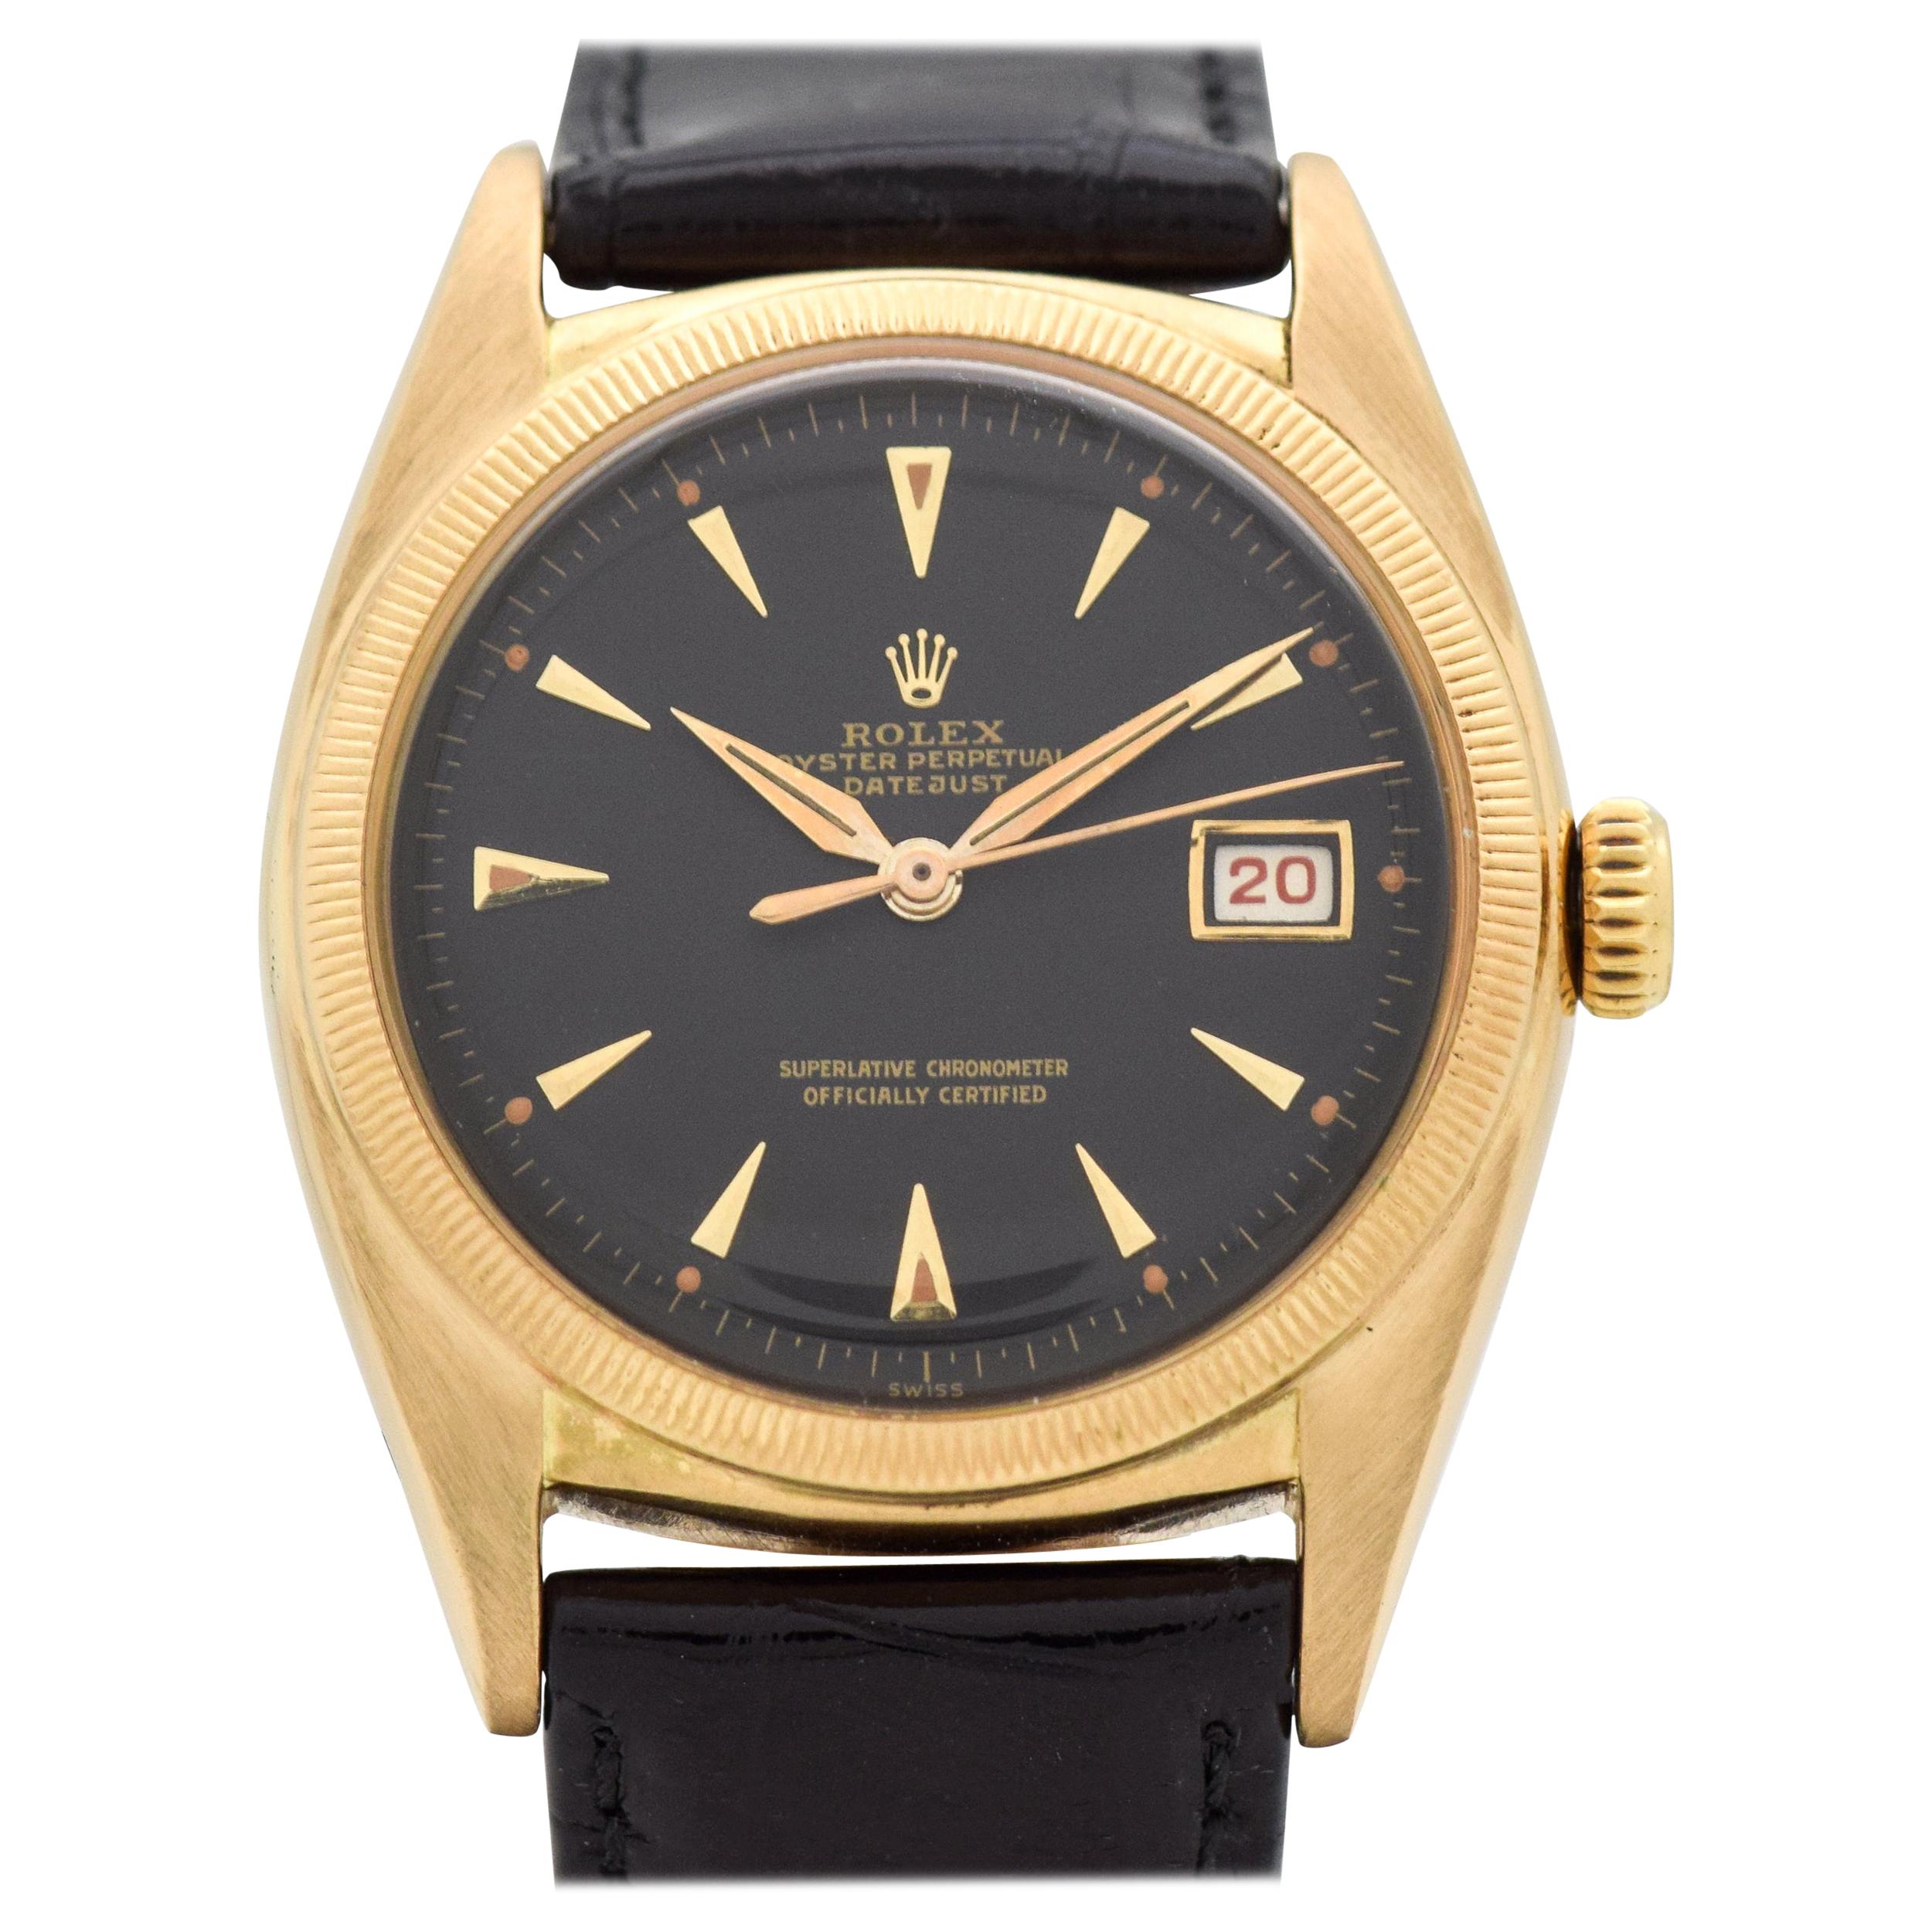 Vintage Rolex Datejust Reference 6105 Ovettone 18 Karat Yellow Gold Watch, 1952 For Sale